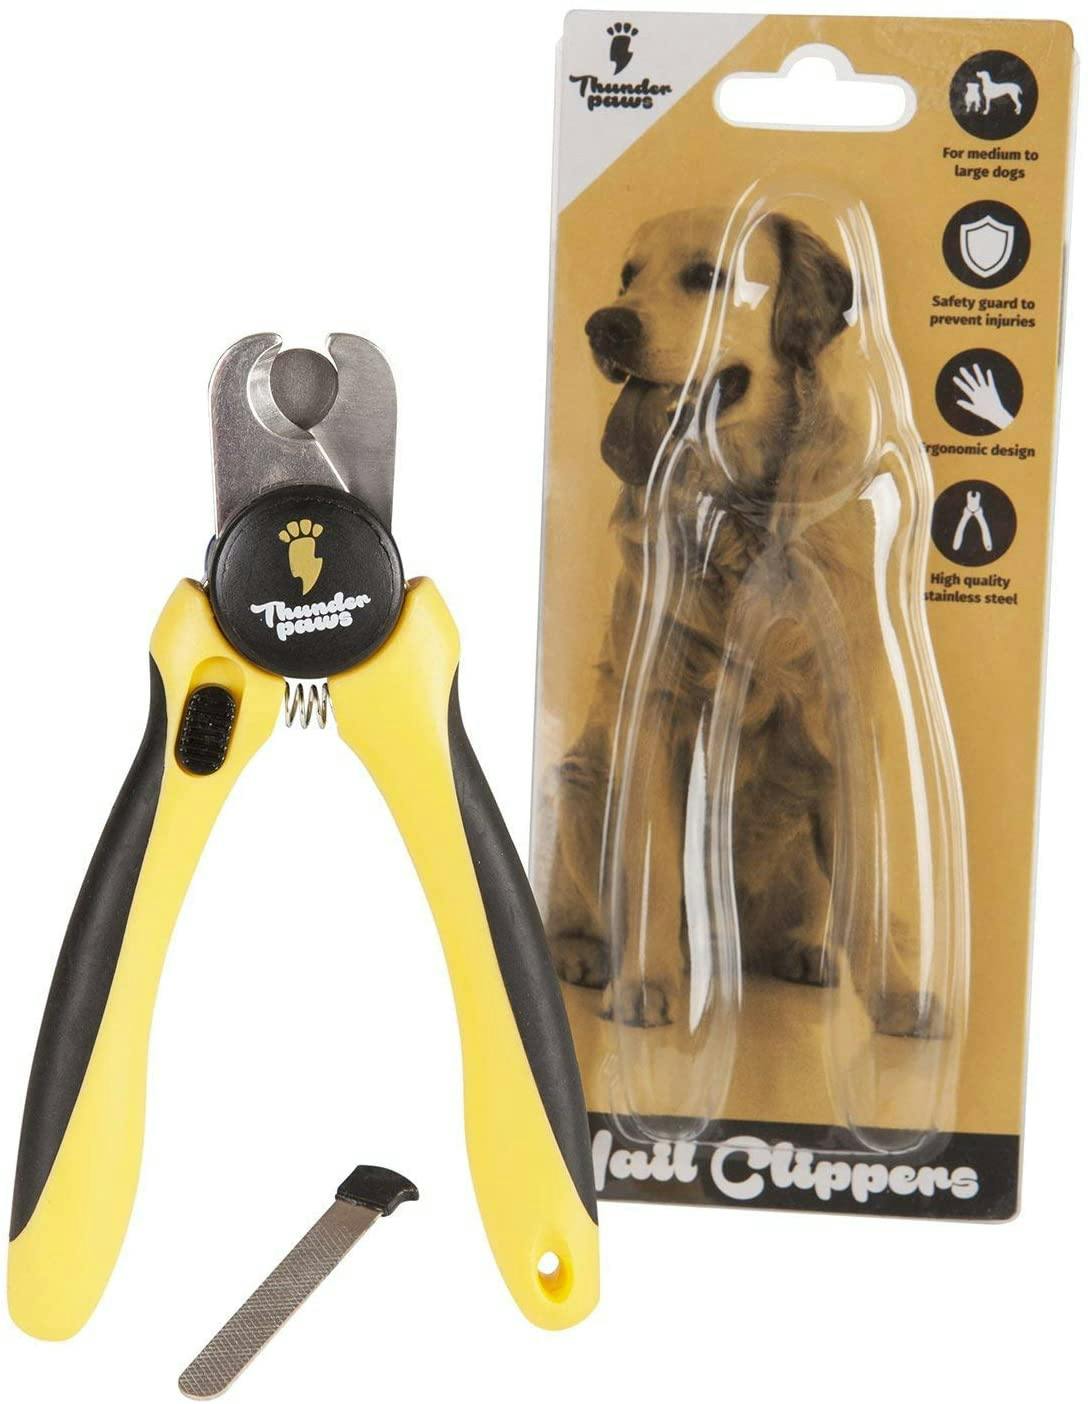 Professional Pet Nail Clippers and Trimmer - Best for Cats, Small Dogs and  Any Small Pets. Sharp Angled Blade Pet Nail Trimmer Scissors. - Walmart.com